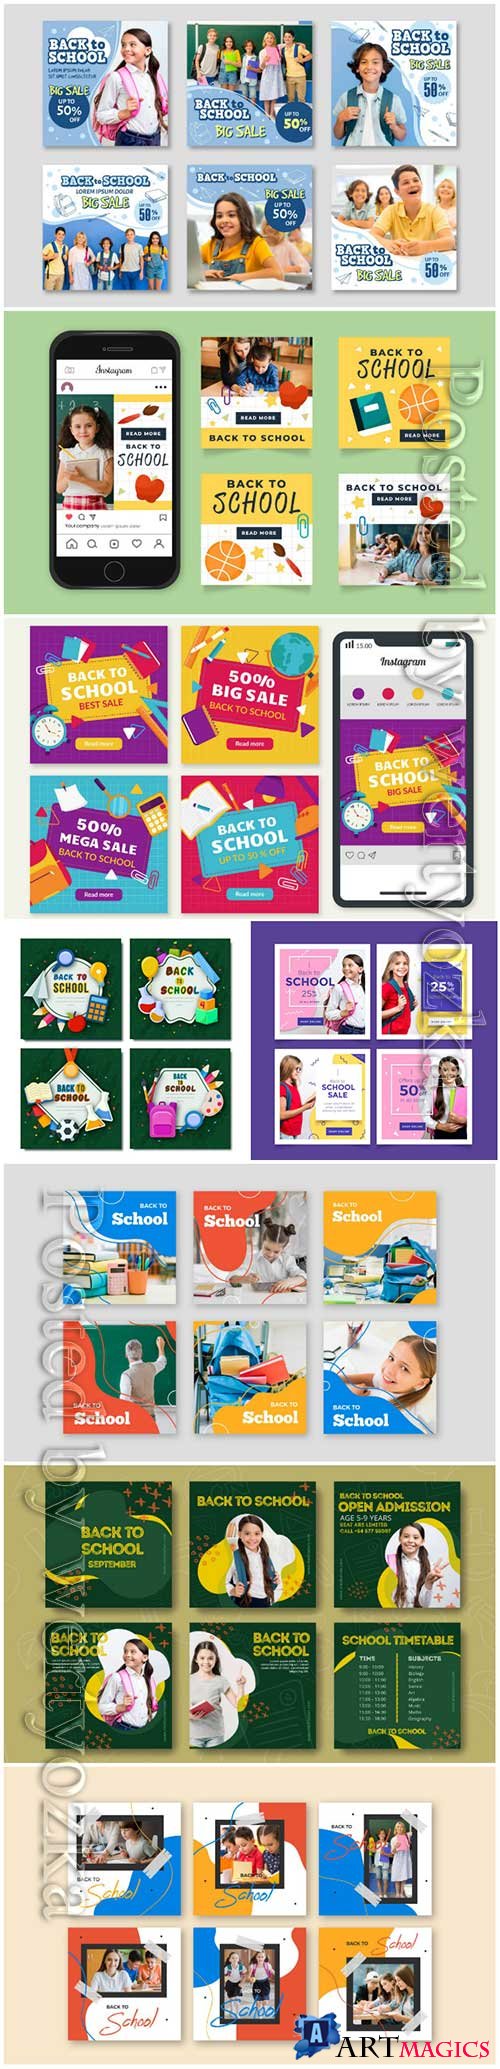 Hand drawn back to school instagram post collection vector illustration